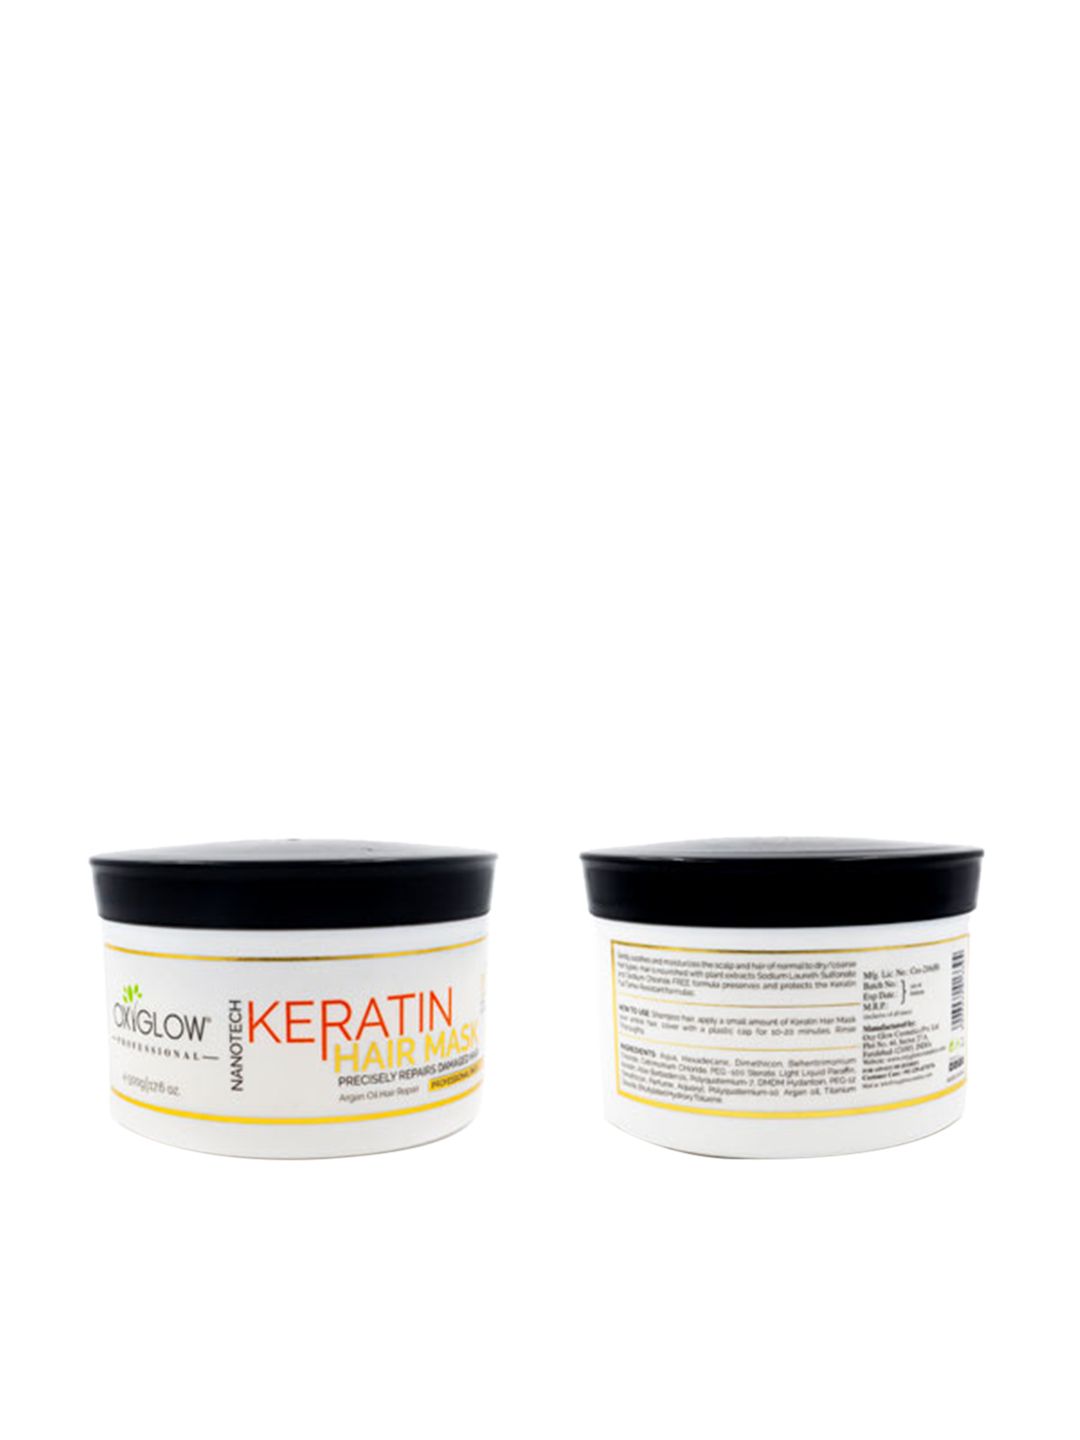 Oxyglow Keratin Hair Mask with Argan Oil - 500g Price in India